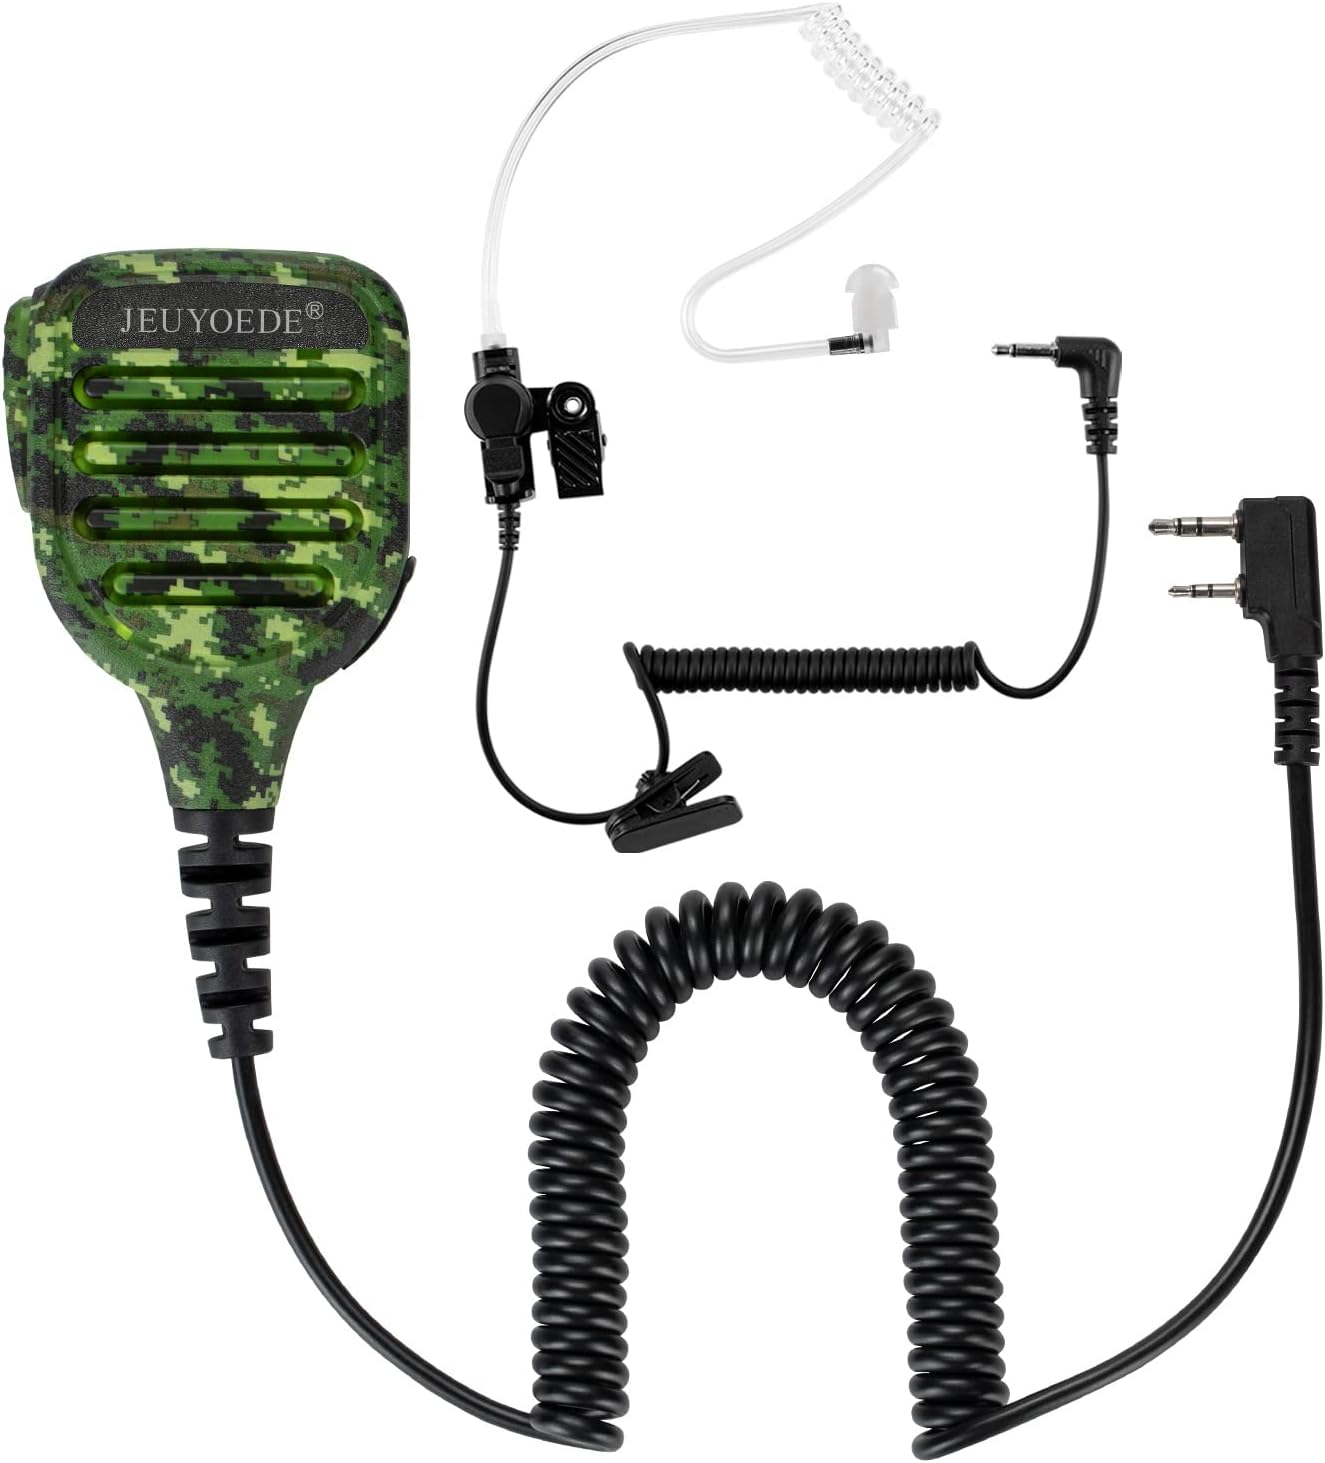 JEUYOEDE Waterproof IP56 Handheld Speaker Microphone with 3.5mm Earpiece Jack Compatible for Baofeng and Kenwood 2 Pin Radios (Green Camouflage)